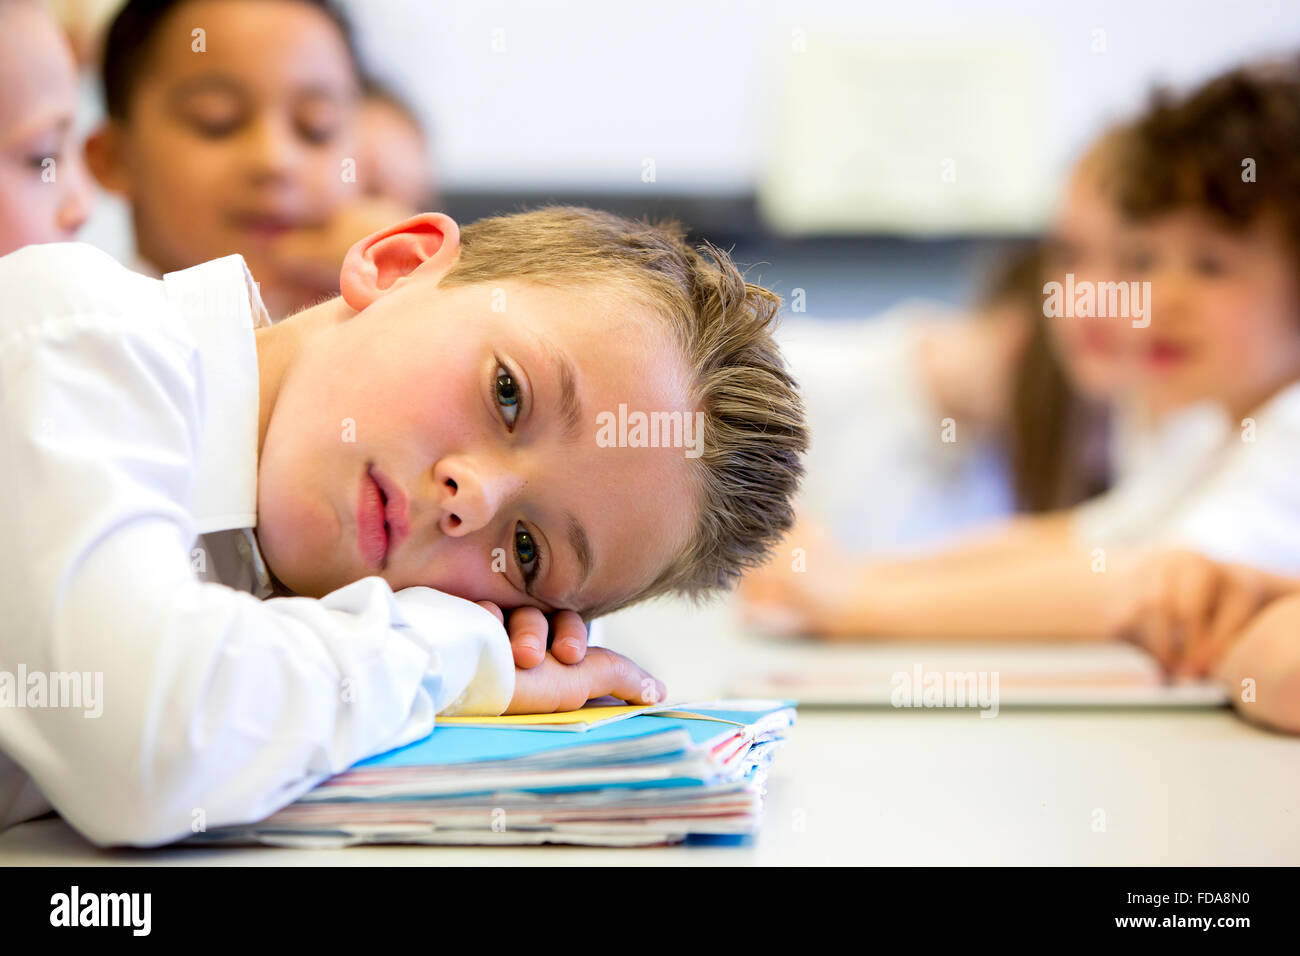 A close up shot of a little boy at school who looks distant and upset. Stock Photo